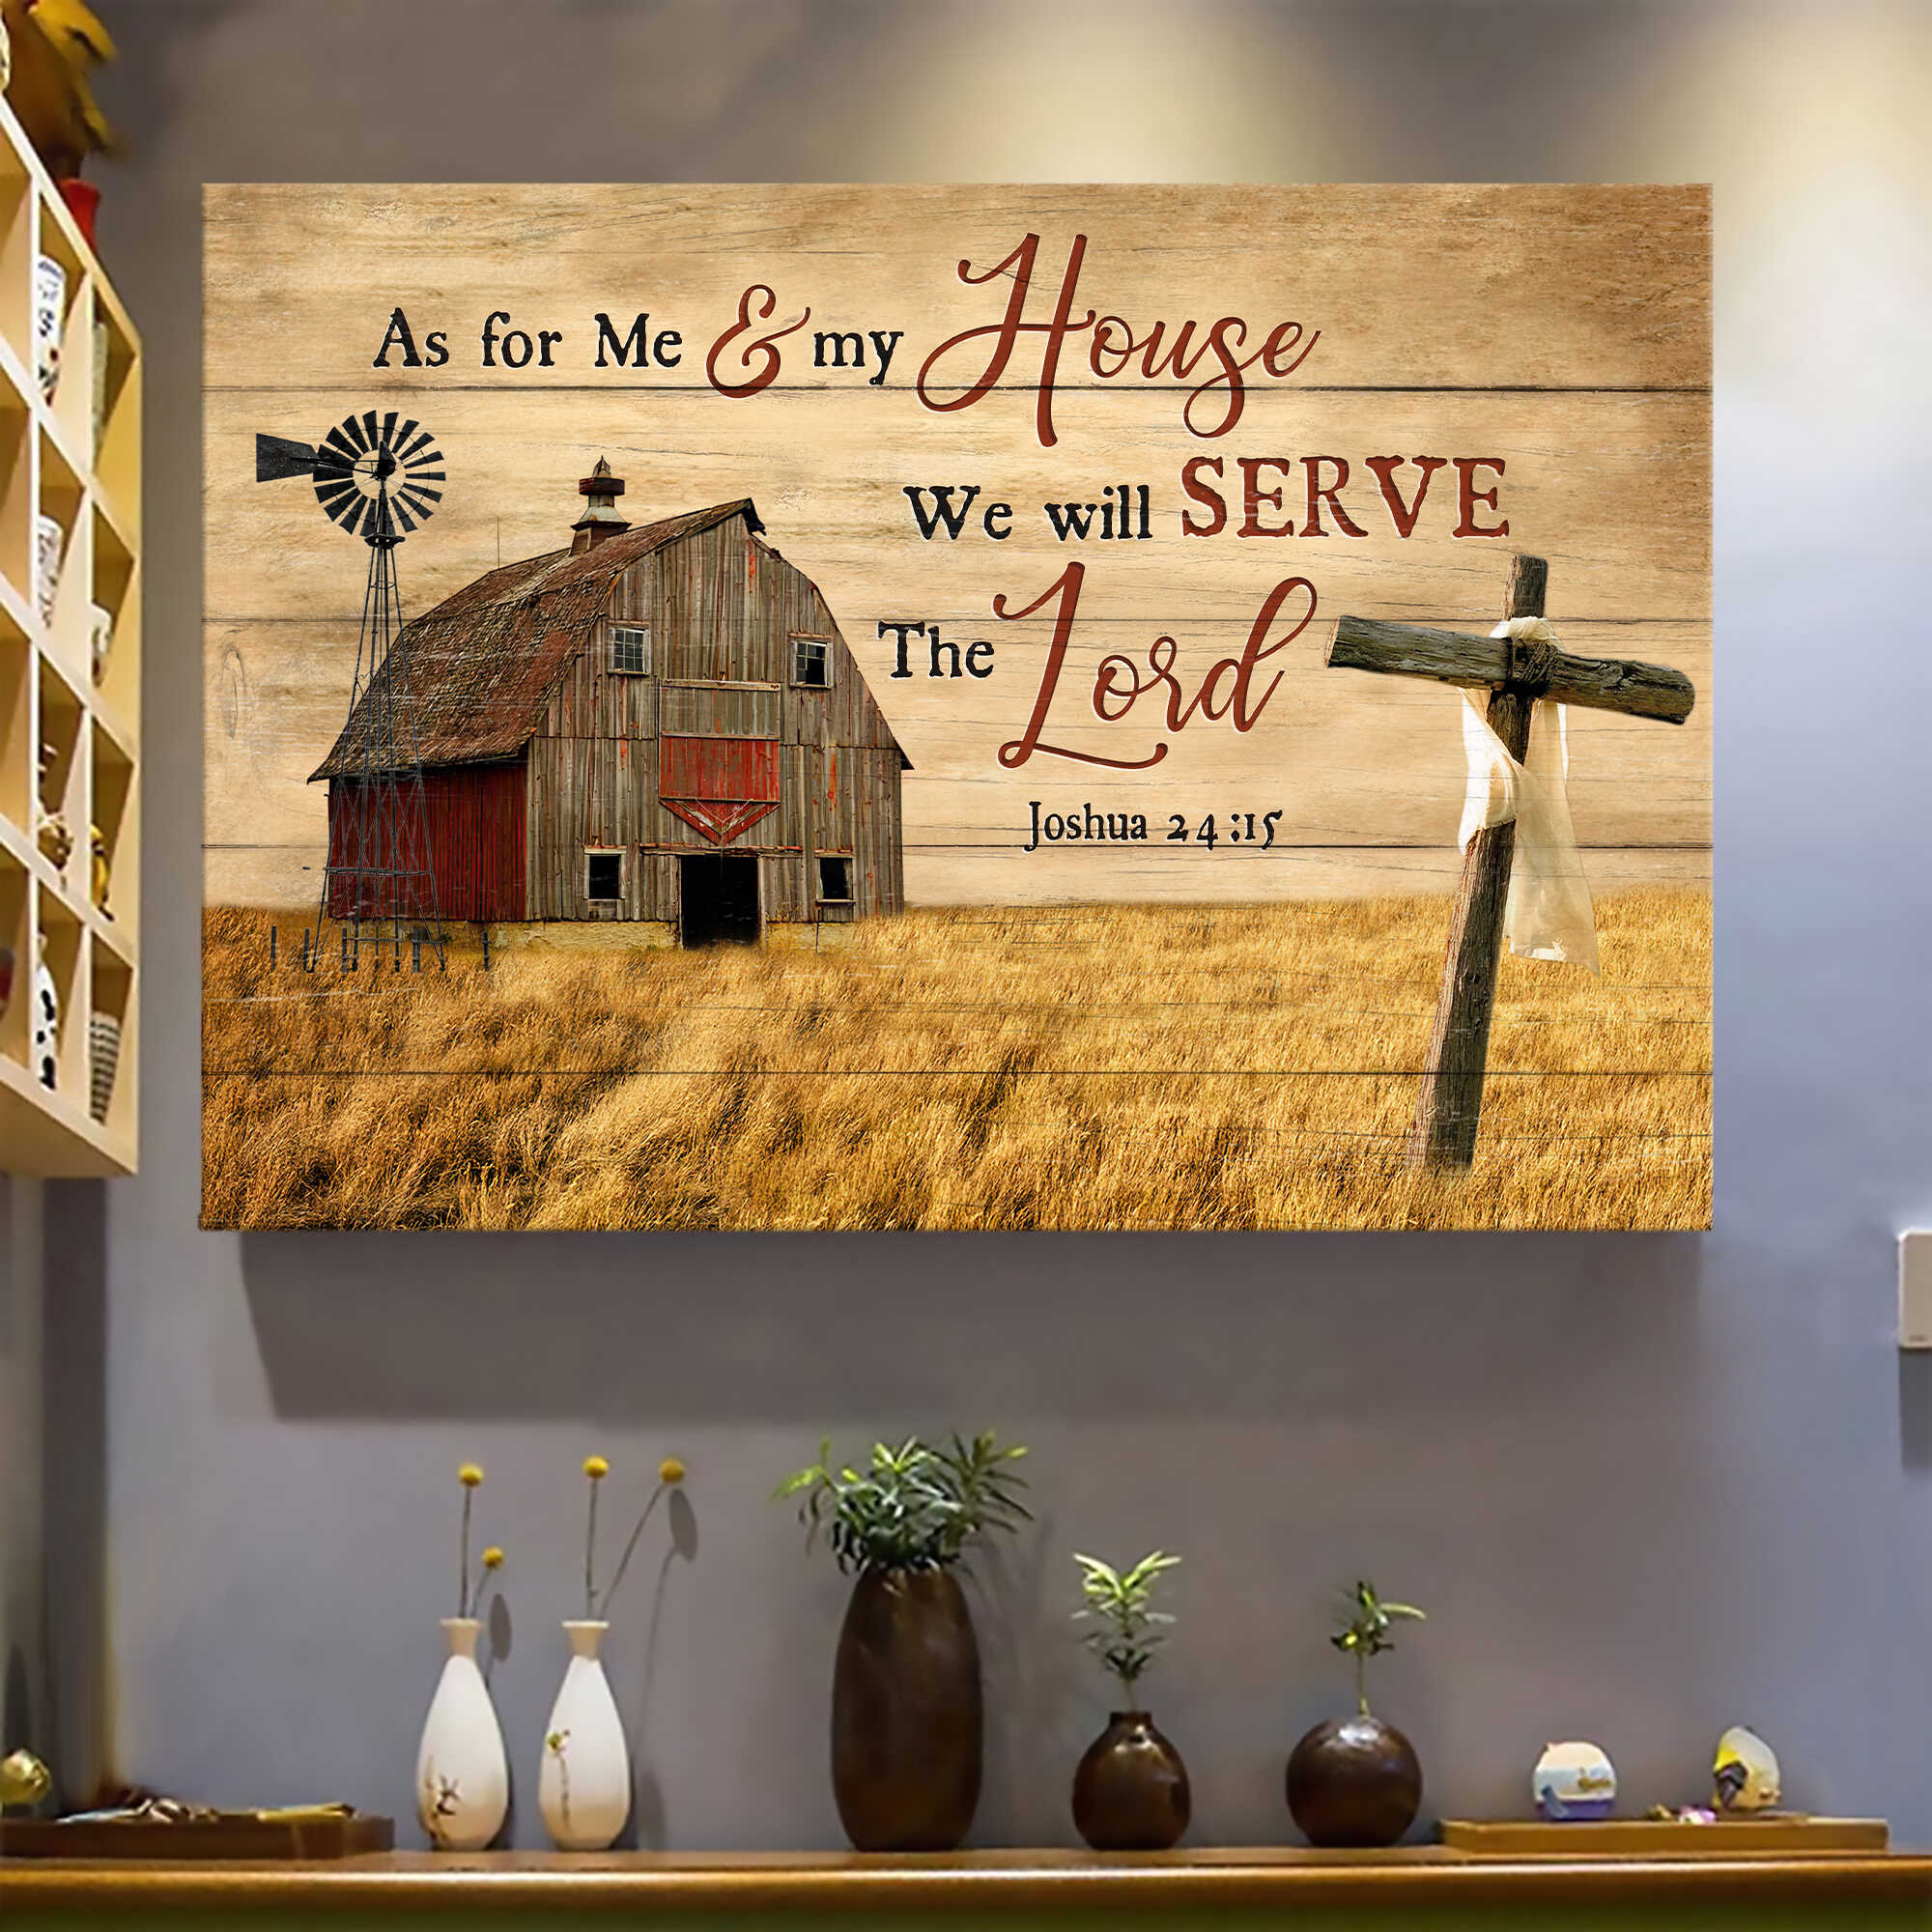 Wooden Cross, Old Barn Painting, As for me and my house we will serve the Lord - Jesus Landscape Canvas Prints, Wall Art